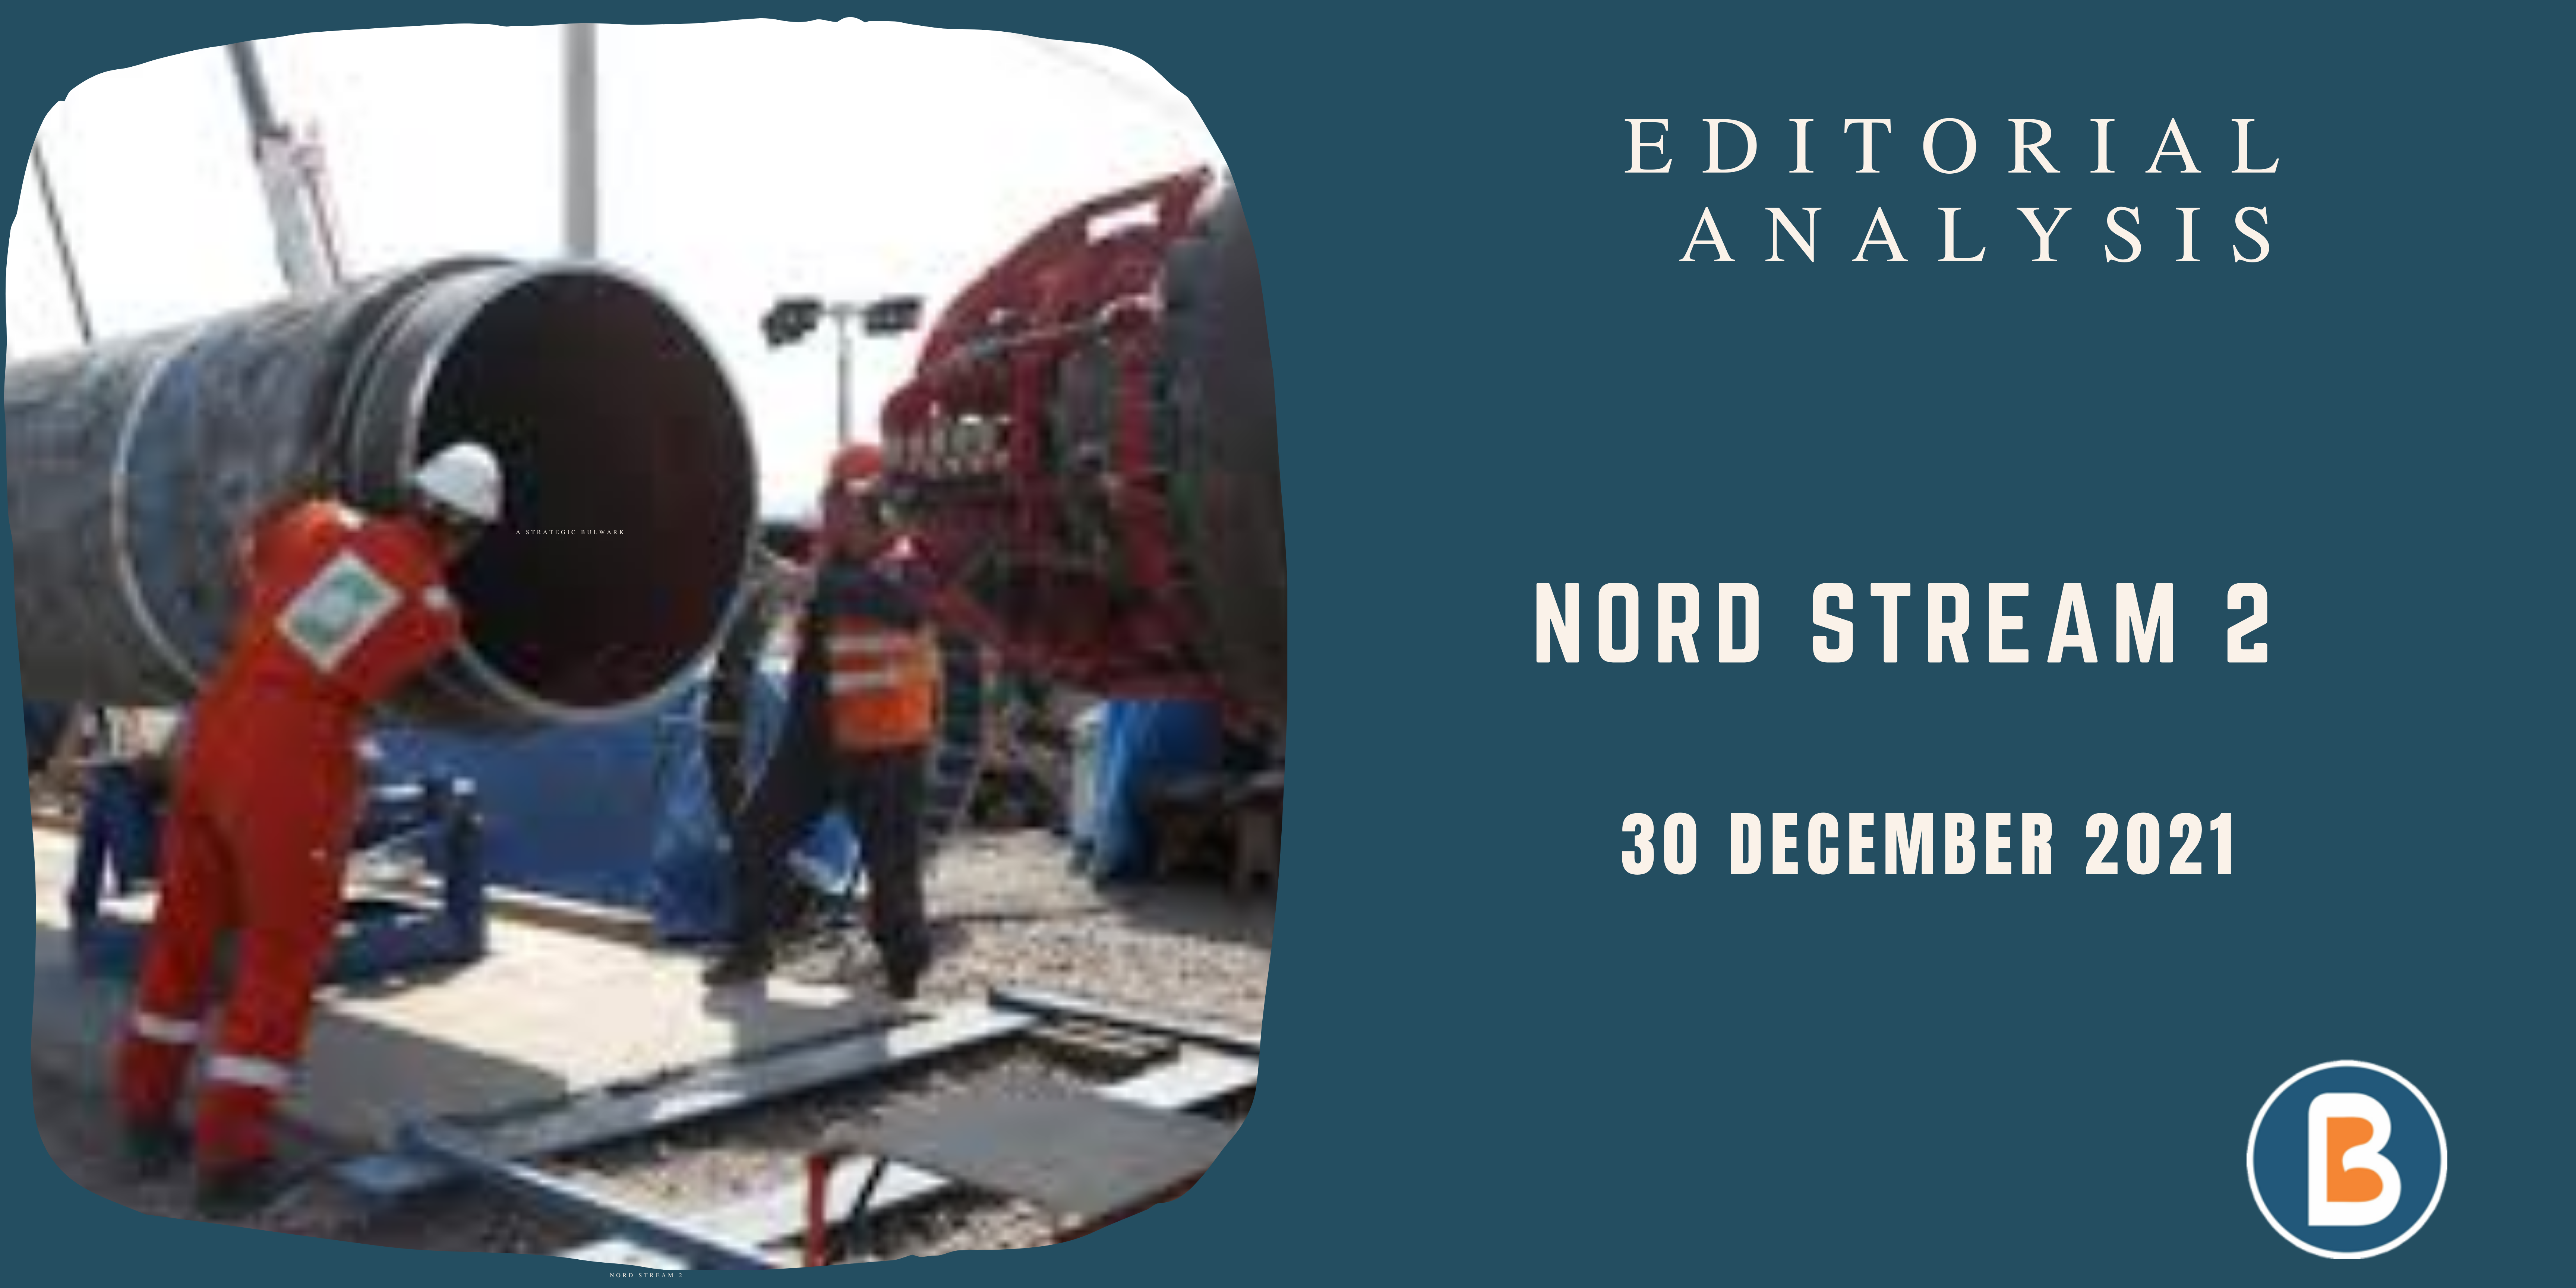 Editorial Analysis for Civil Services - NORD STREAM 2